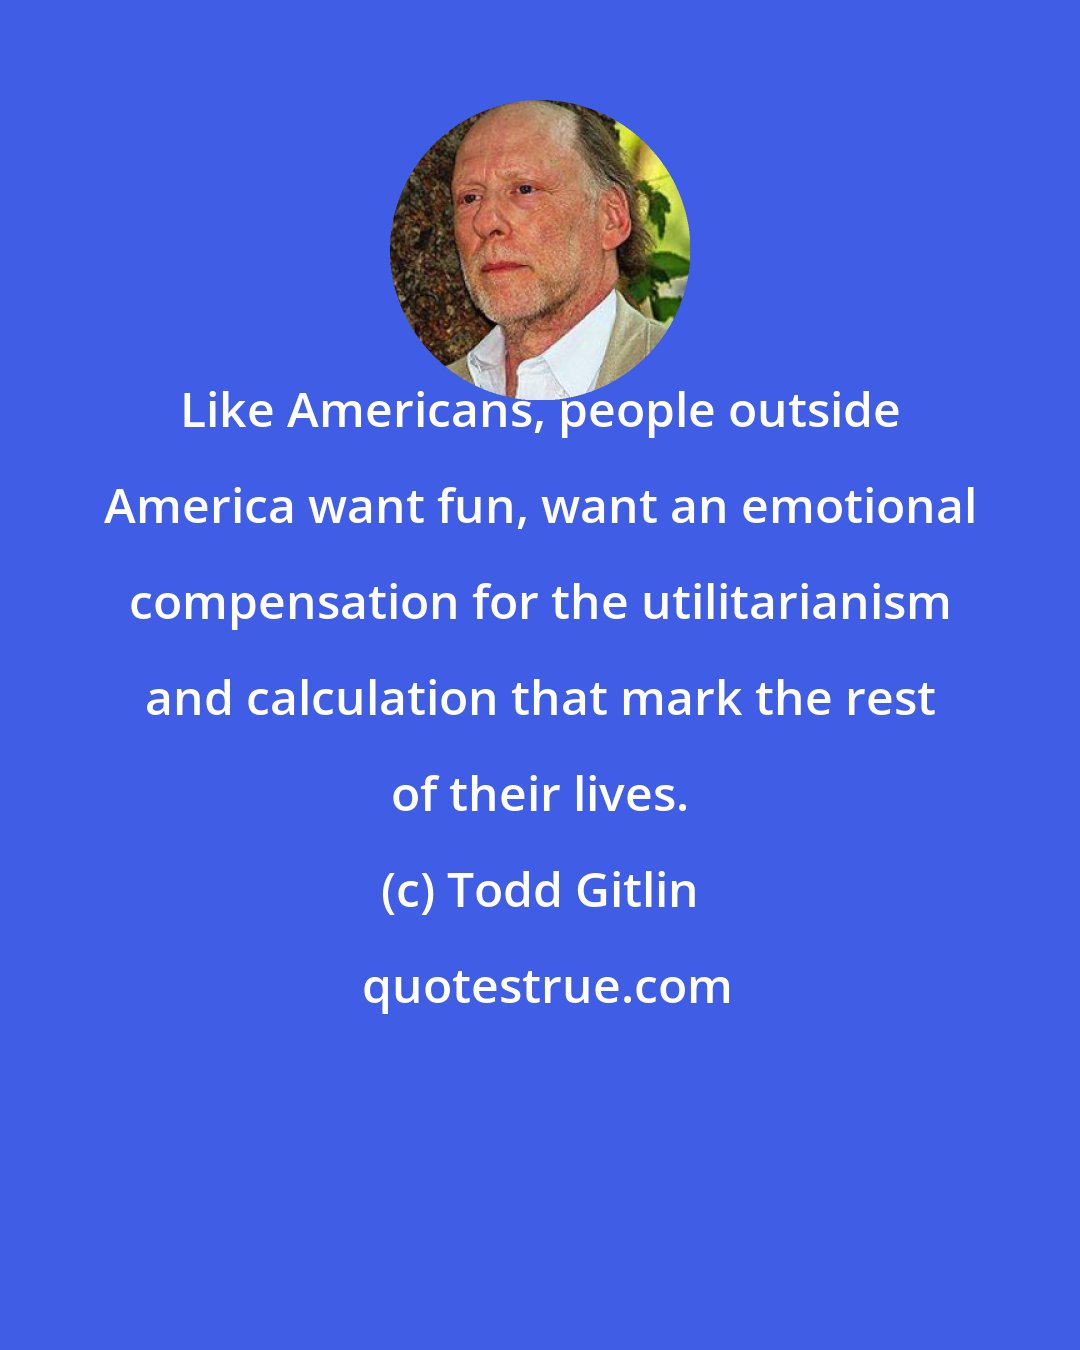 Todd Gitlin: Like Americans, people outside America want fun, want an emotional compensation for the utilitarianism and calculation that mark the rest of their lives.